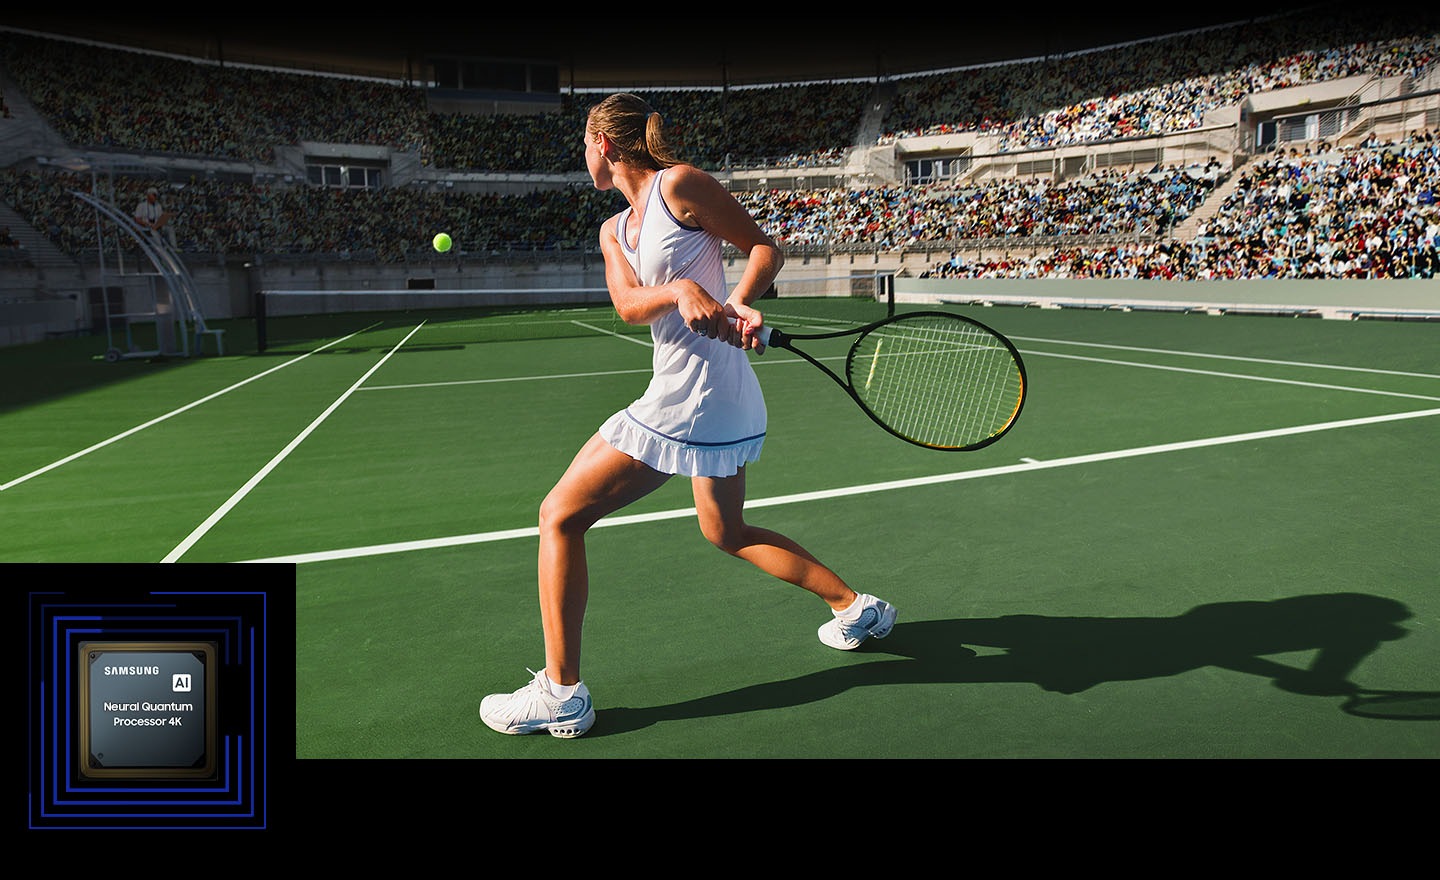 A woman is playing tennis in front of a large crowd. The Neural Quantum Processor 4K Processes The Many Objects On Display and Enhances The Entire Scene. Neural Quantum Processor 4K IS On Display in the Lower Lefthand Corner